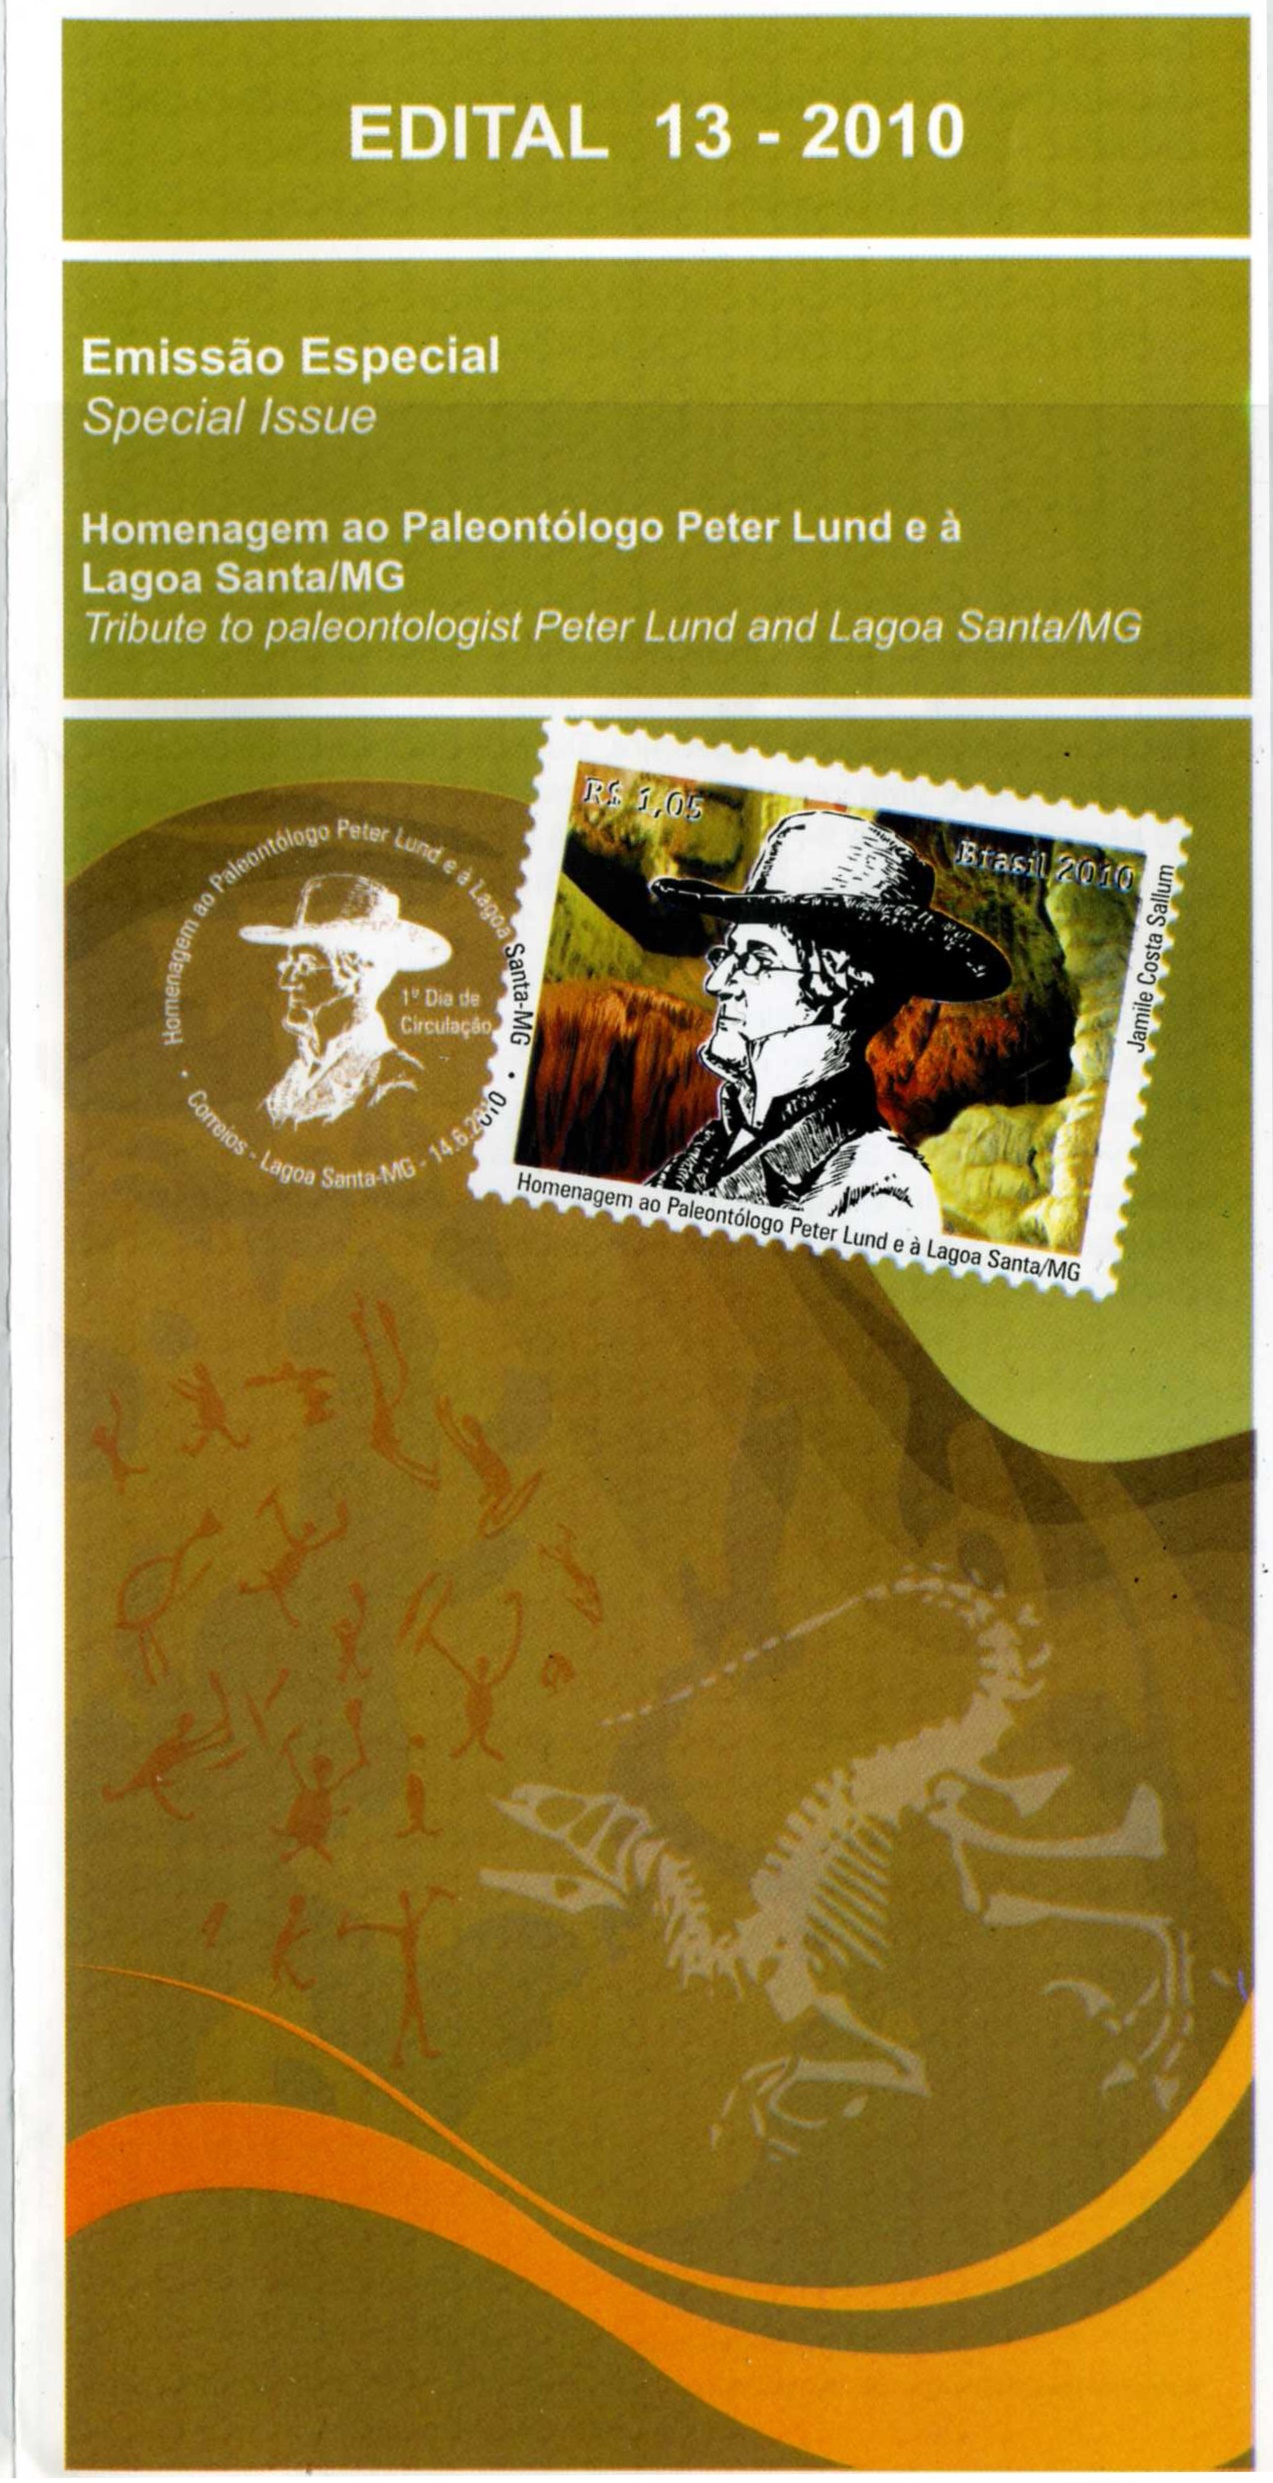 Information flyer for dinosaurs on stamps of Brazil 1995